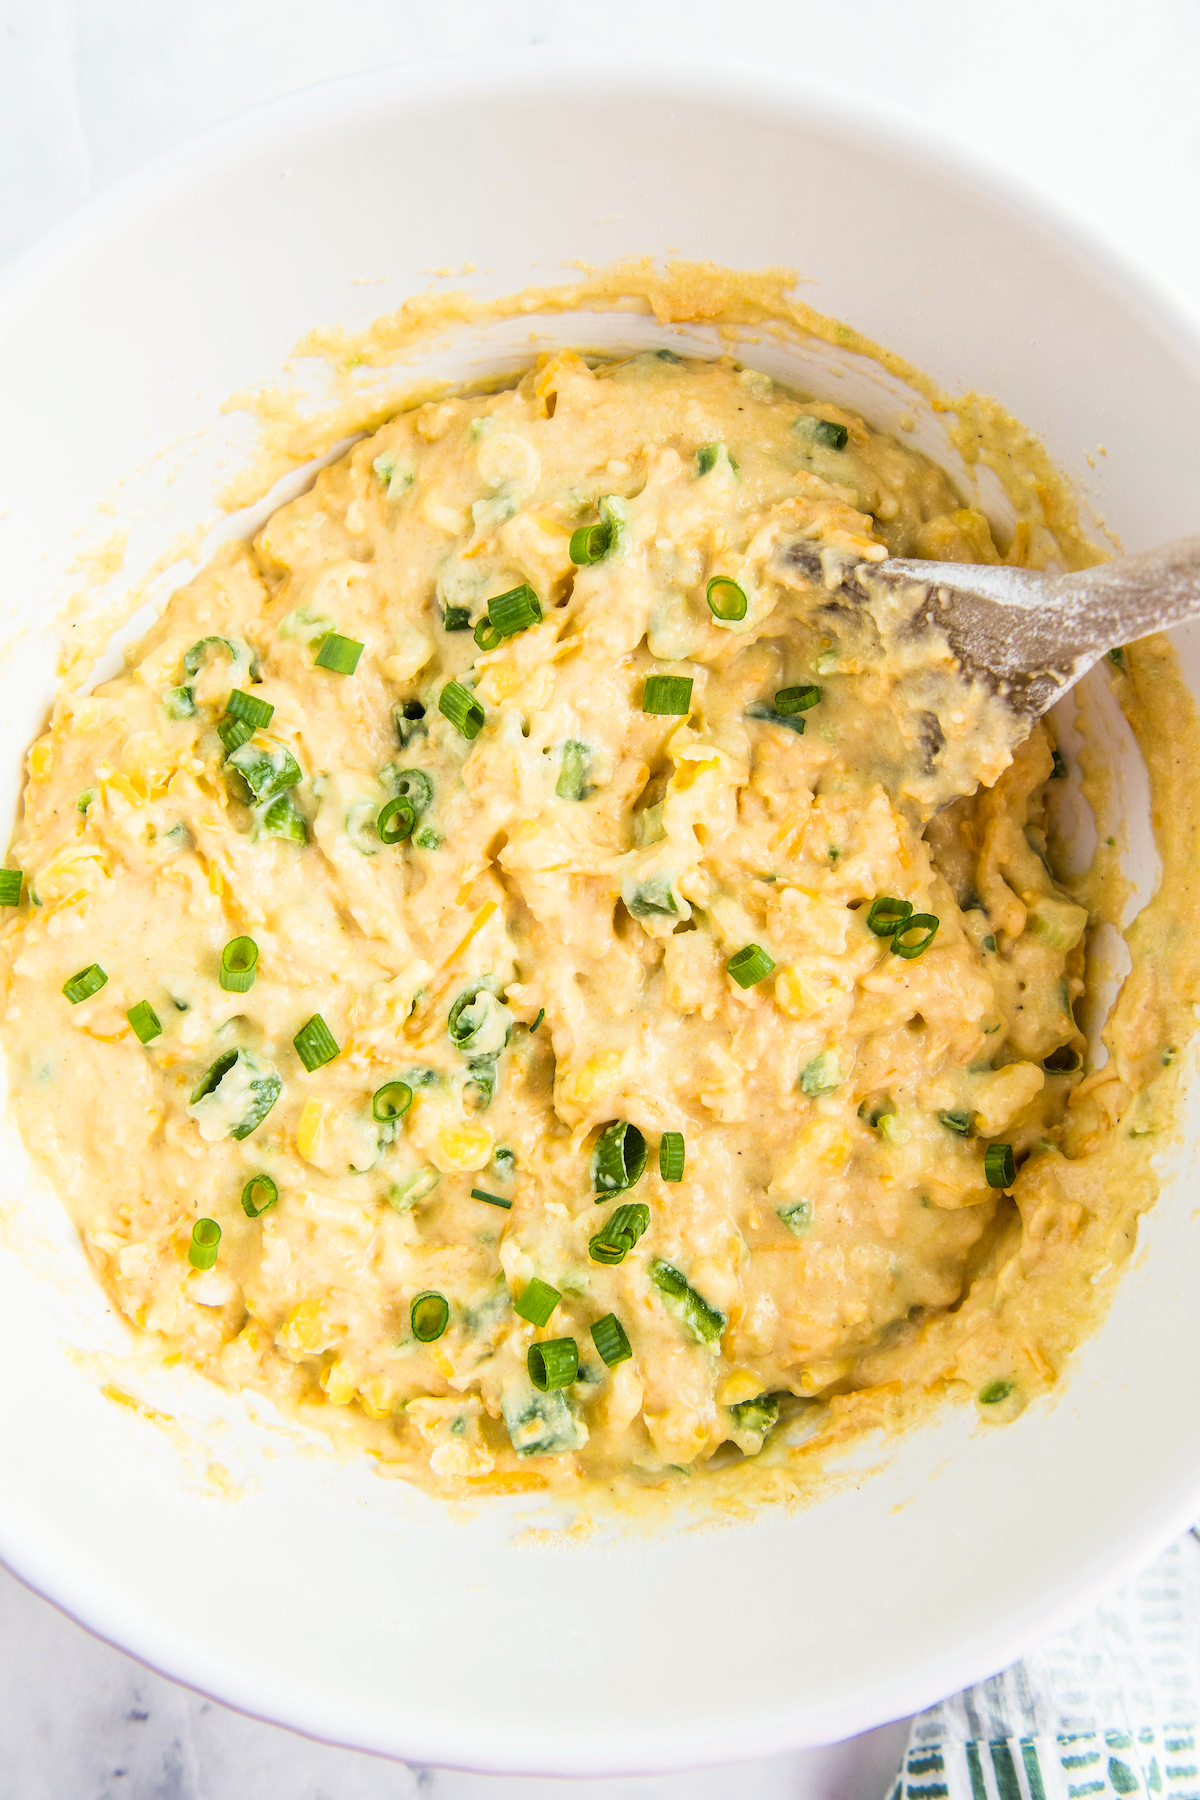 Cornbread batter with jalapenos, cheese, etc.